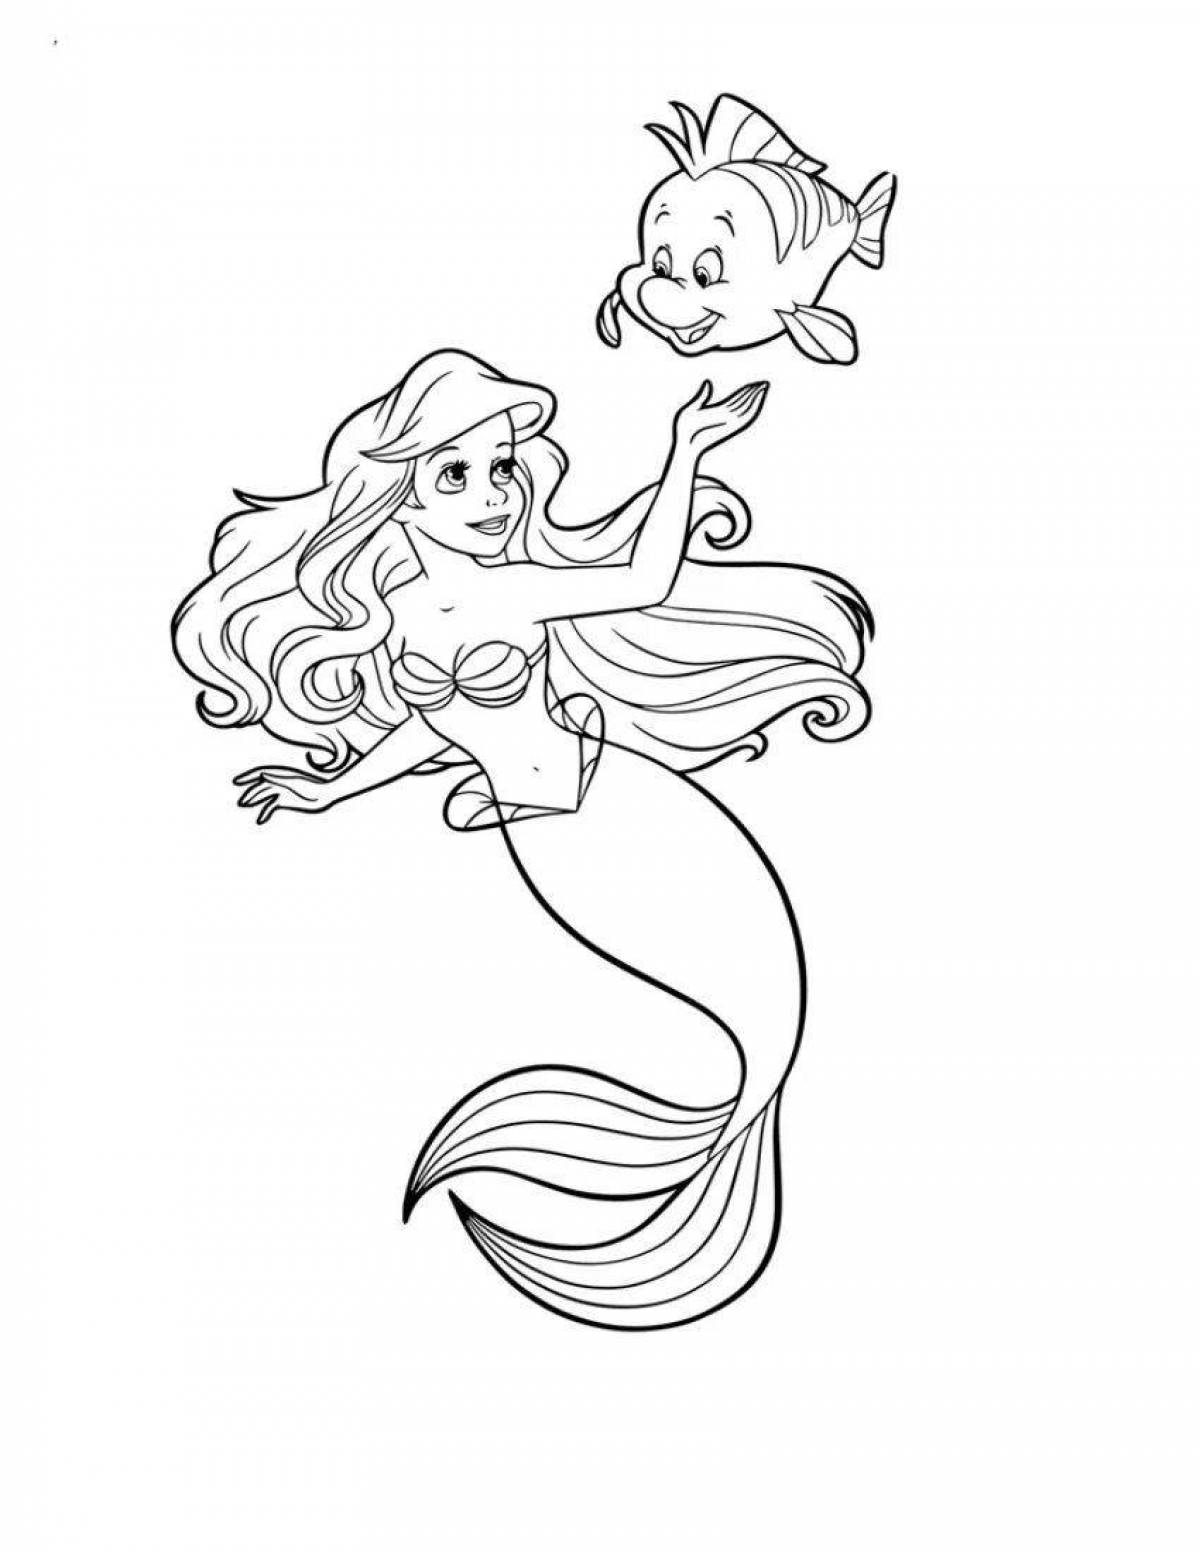 Colorful coloring ariel the little mermaid for kids